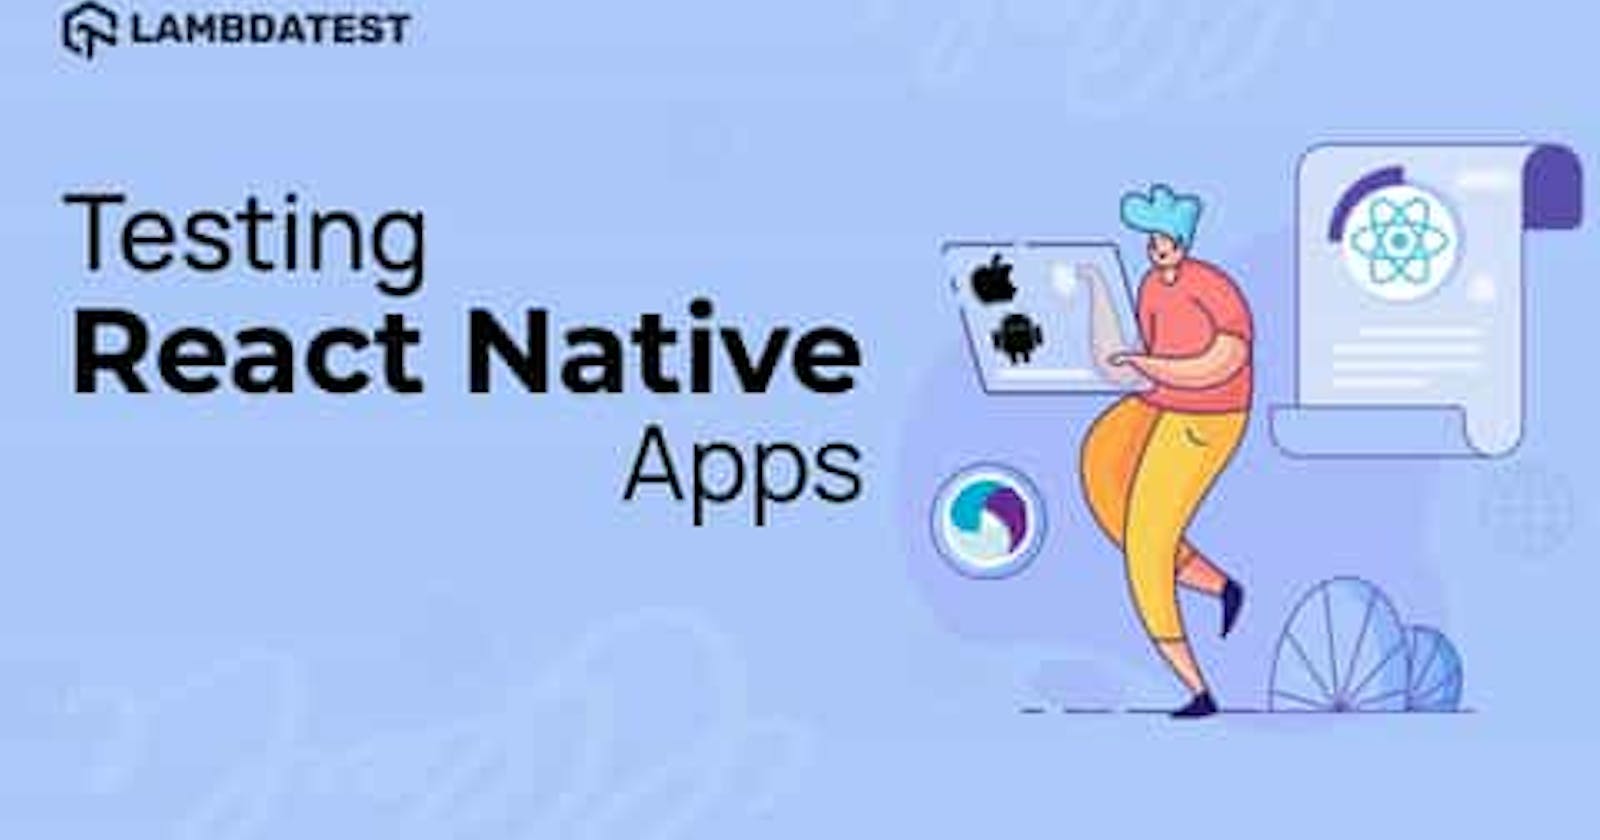 How To Test React Native Apps On iOS And Android